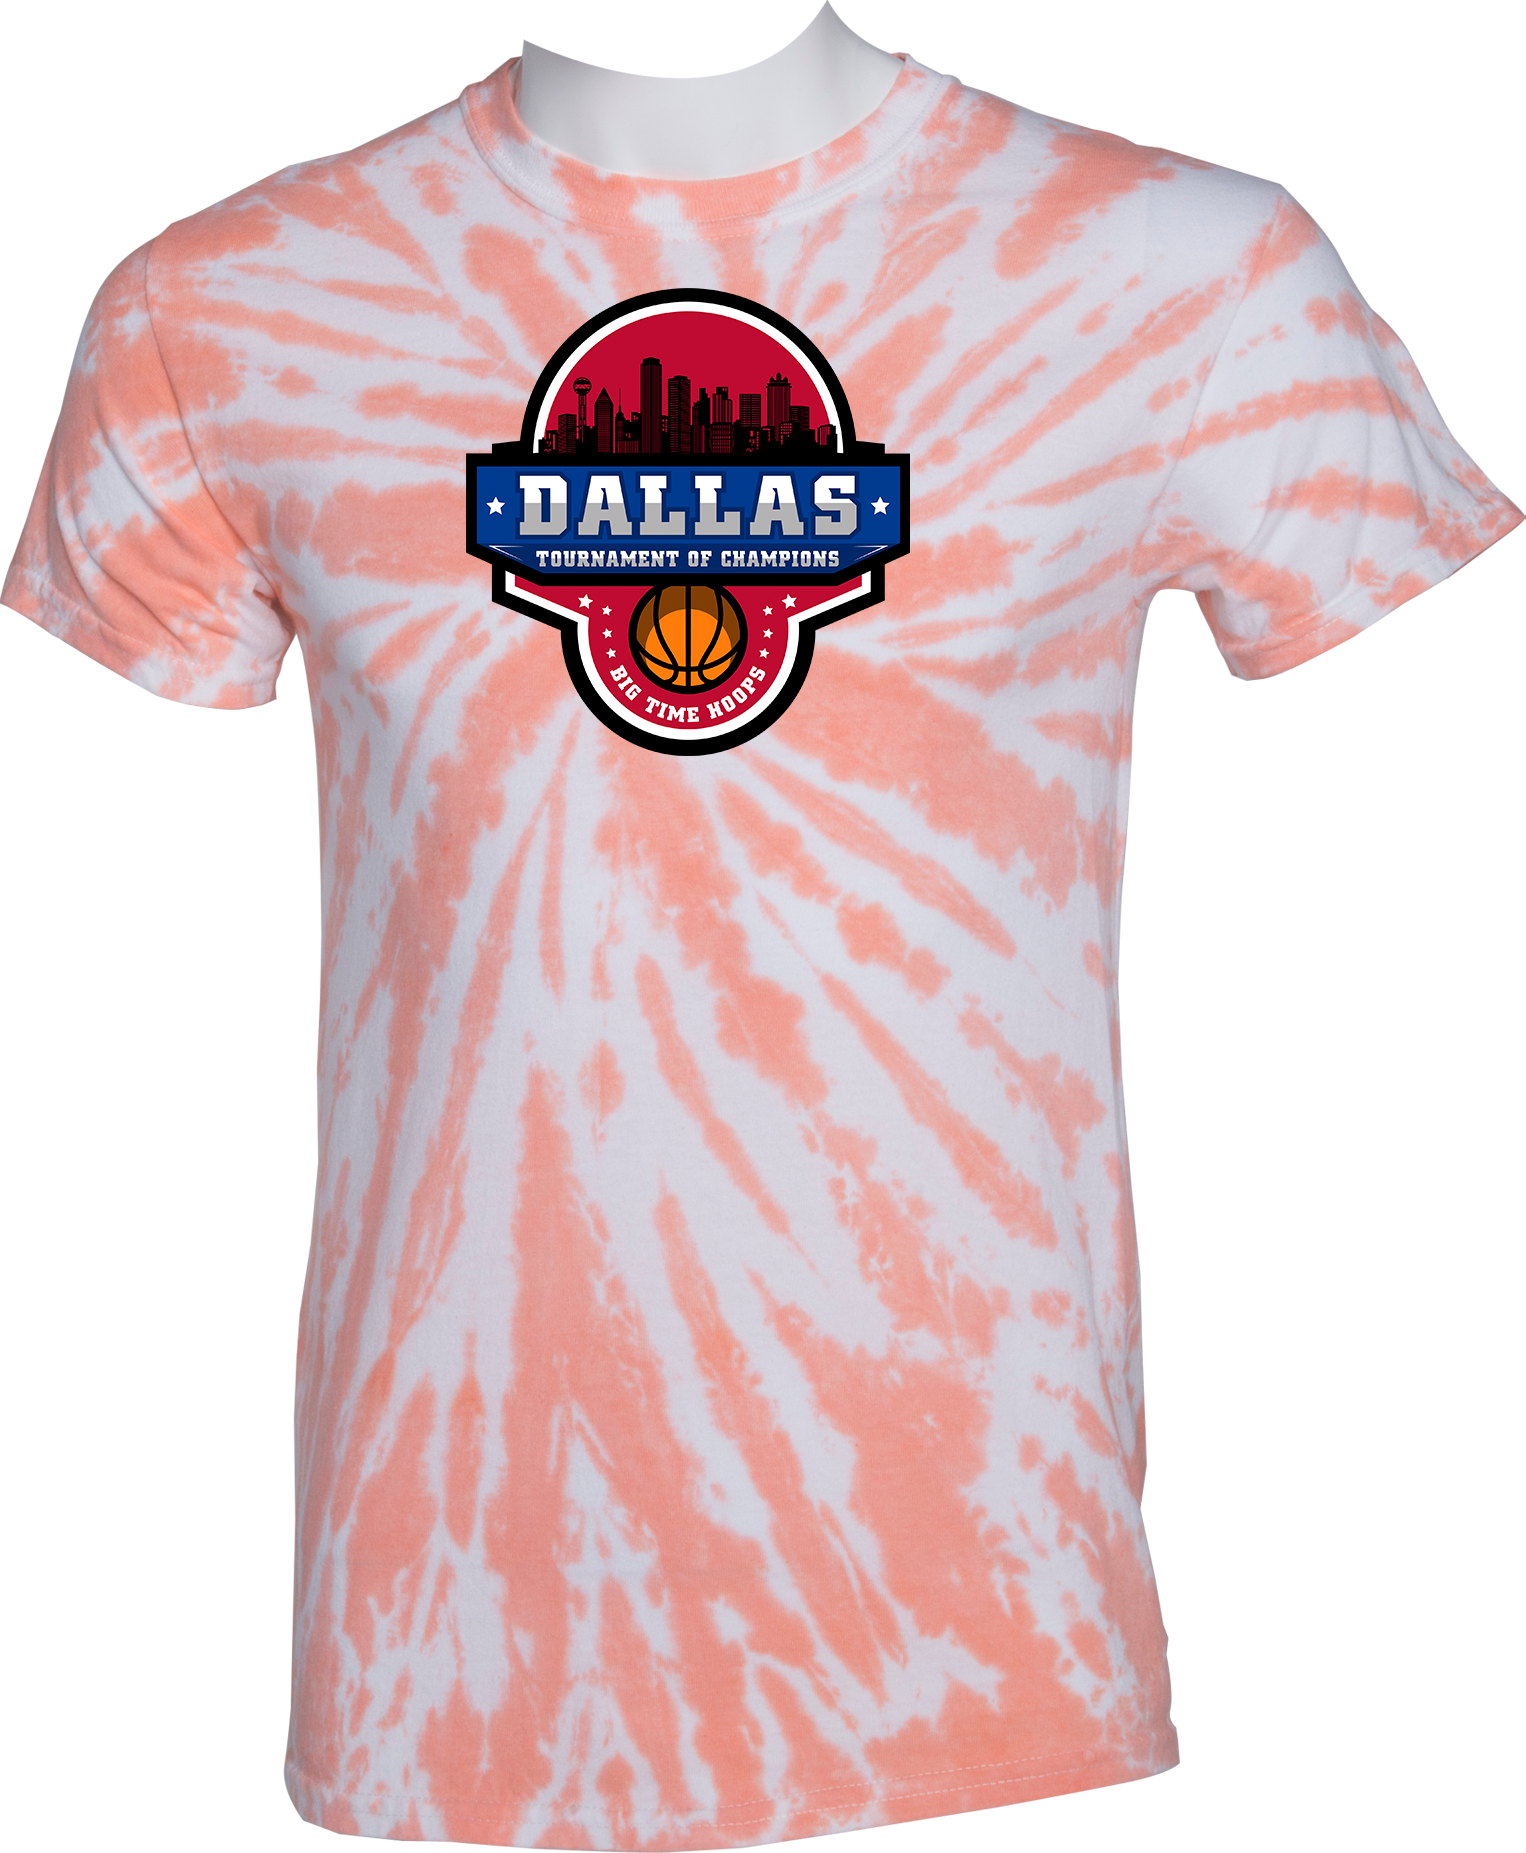 TIE-DYE SHORT SLEEVES - 2023 Dallas Tournament of Champions